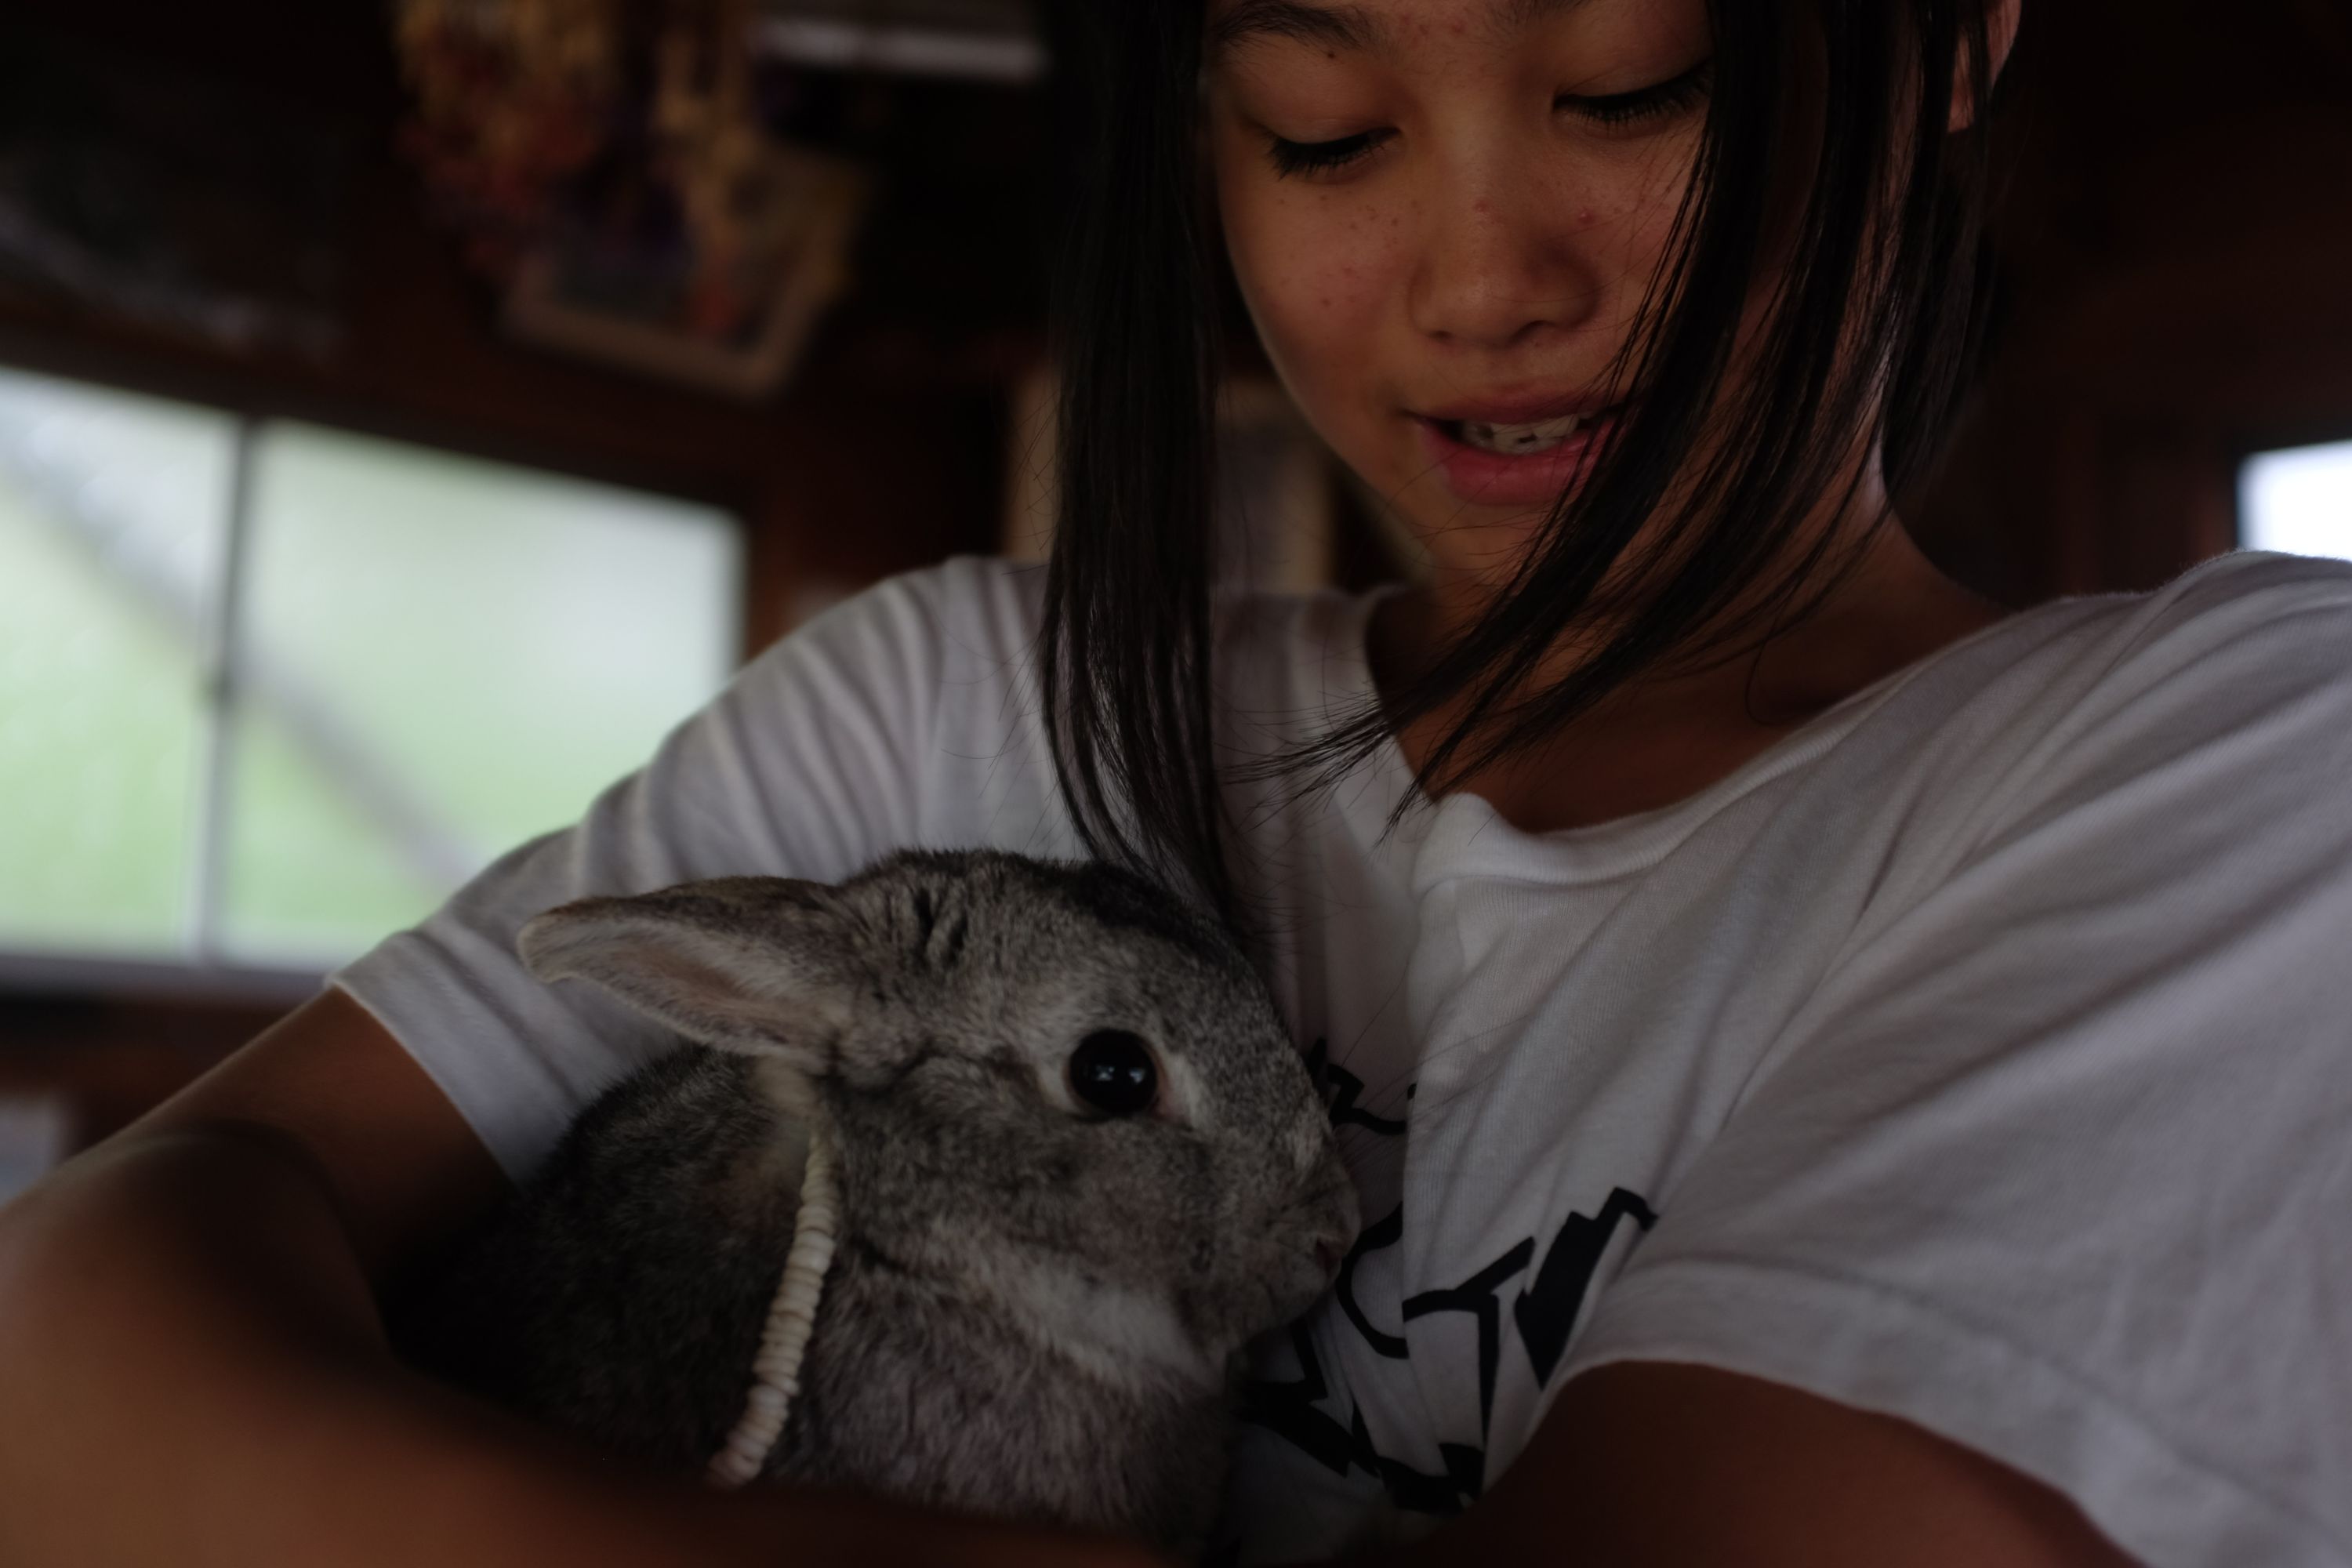 A young girl holds a small grey rabbit against her chest.